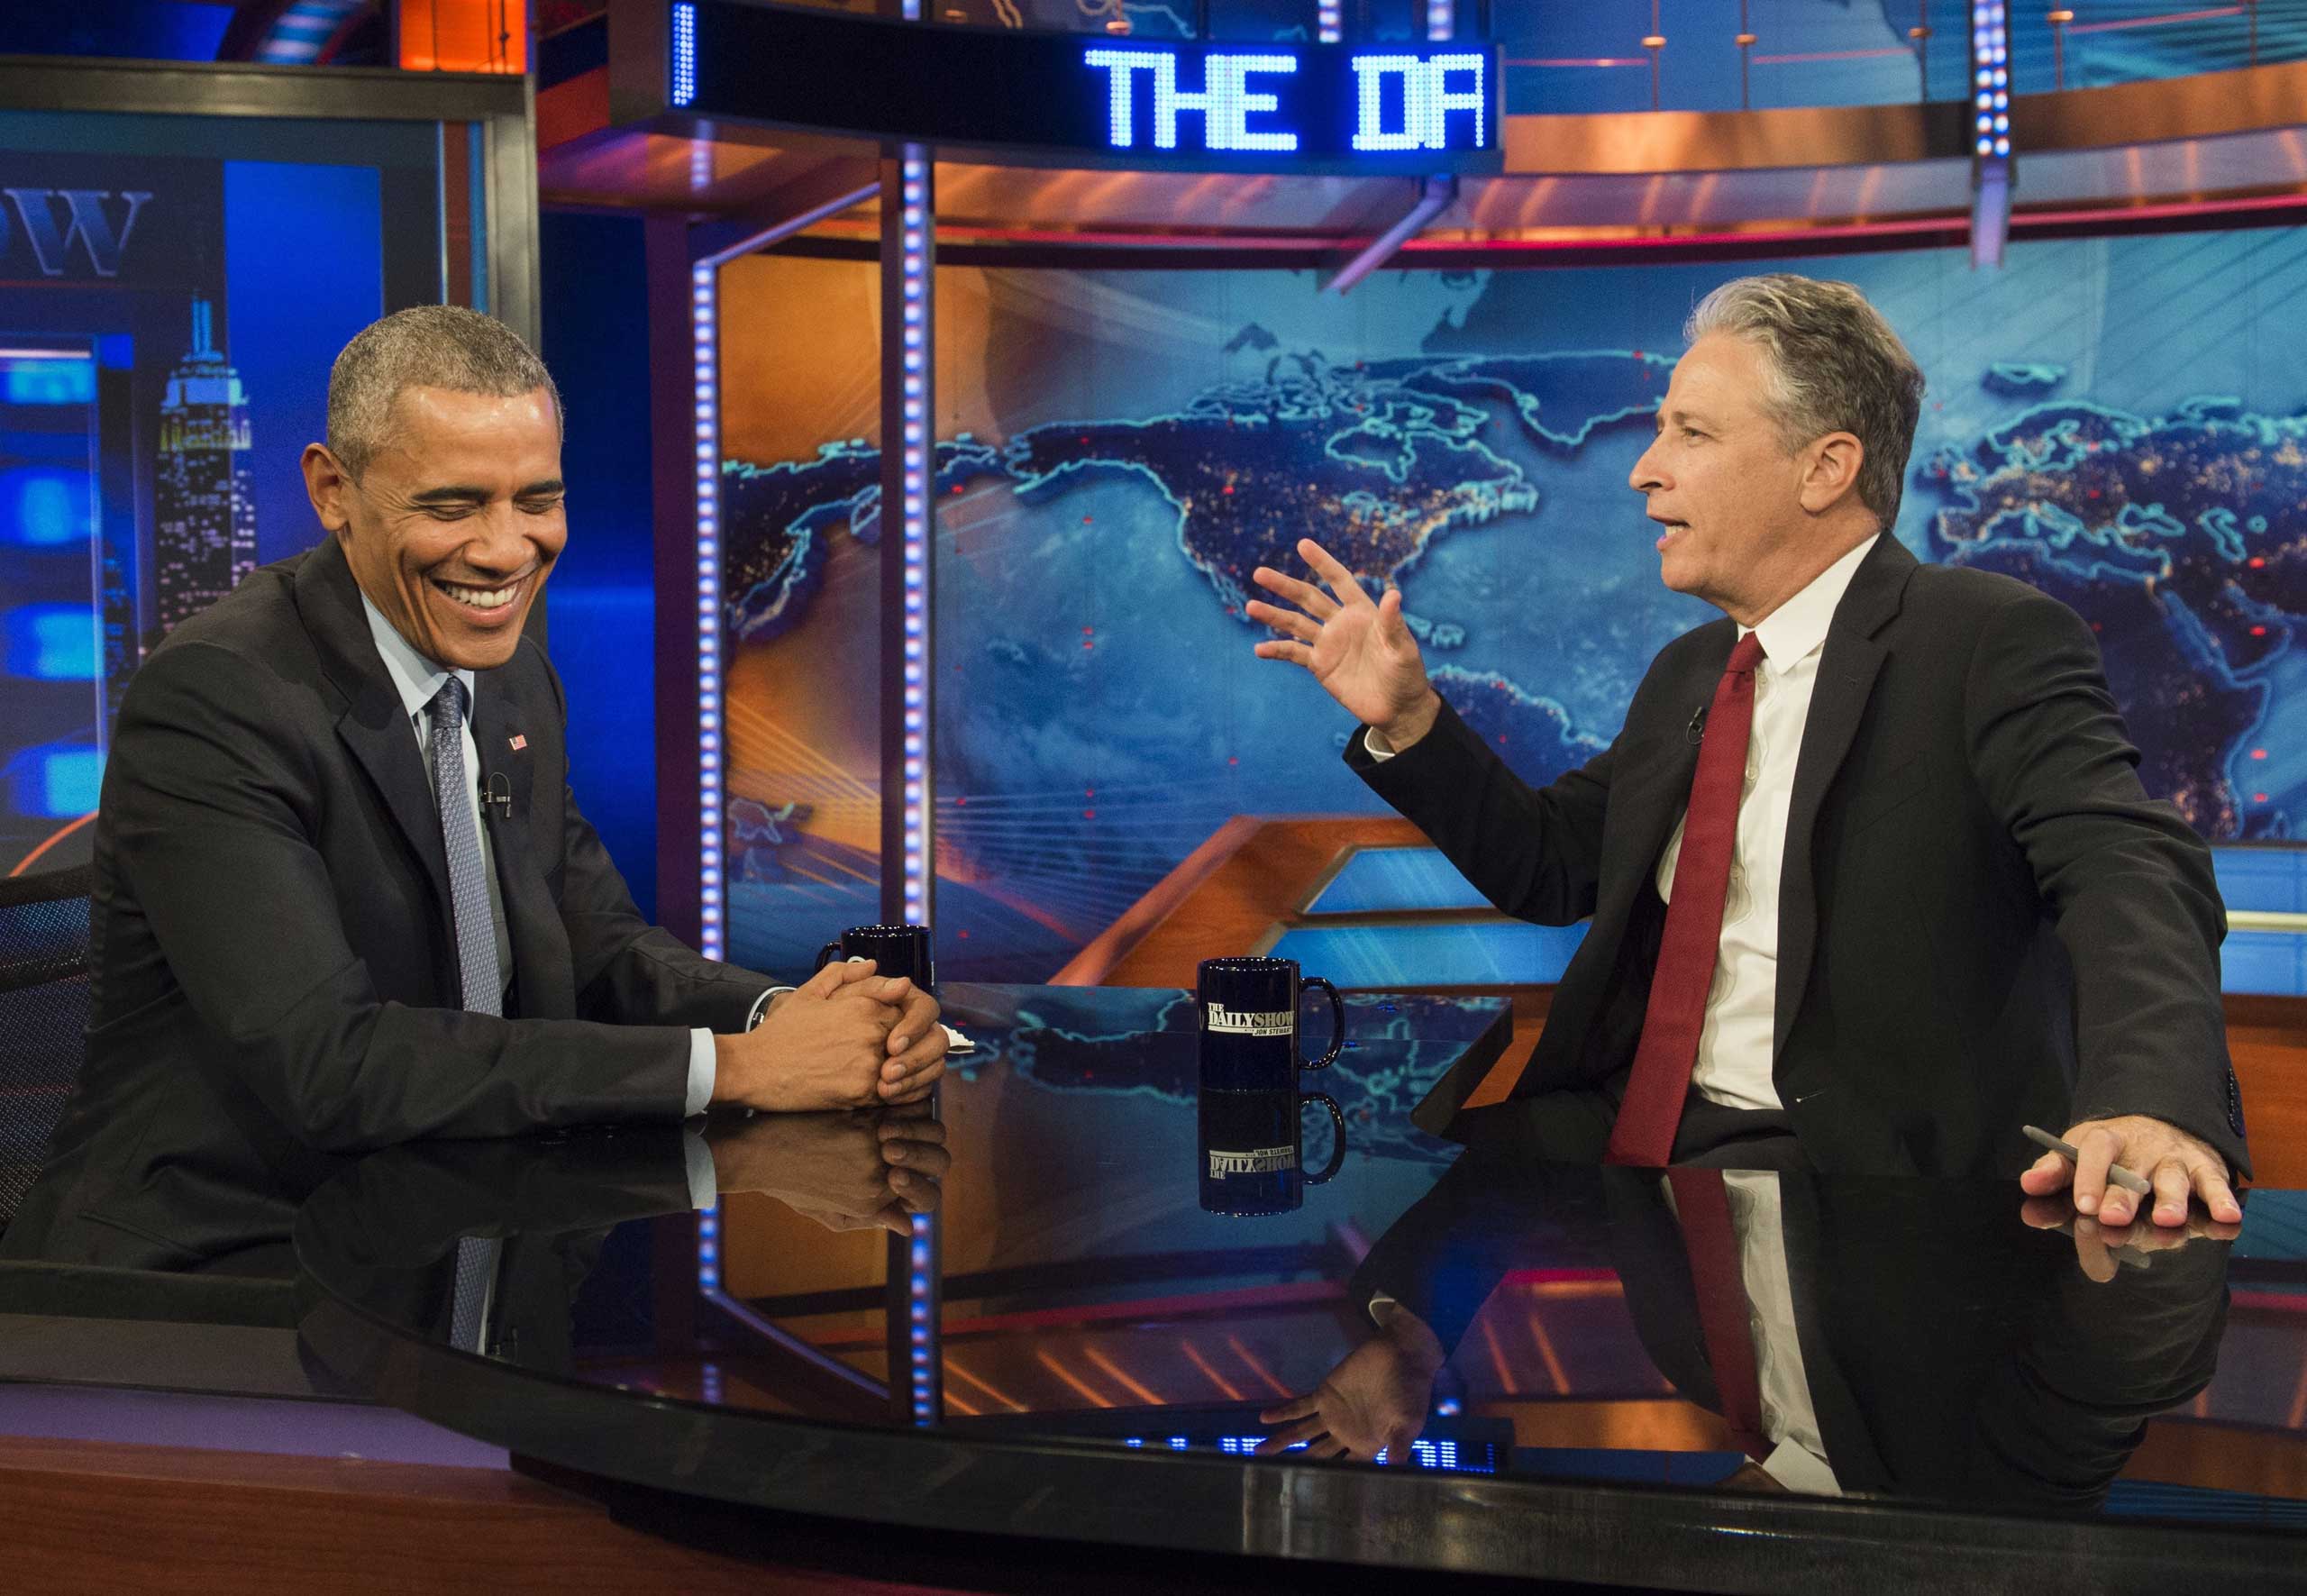 US President Barack Obama speaks with Jon Stewart, host of "The Daily Show with Jon Stewart," during a taping of the show in New York, July 21, 2015. (Saul Loeb—AFP/Getty Images)